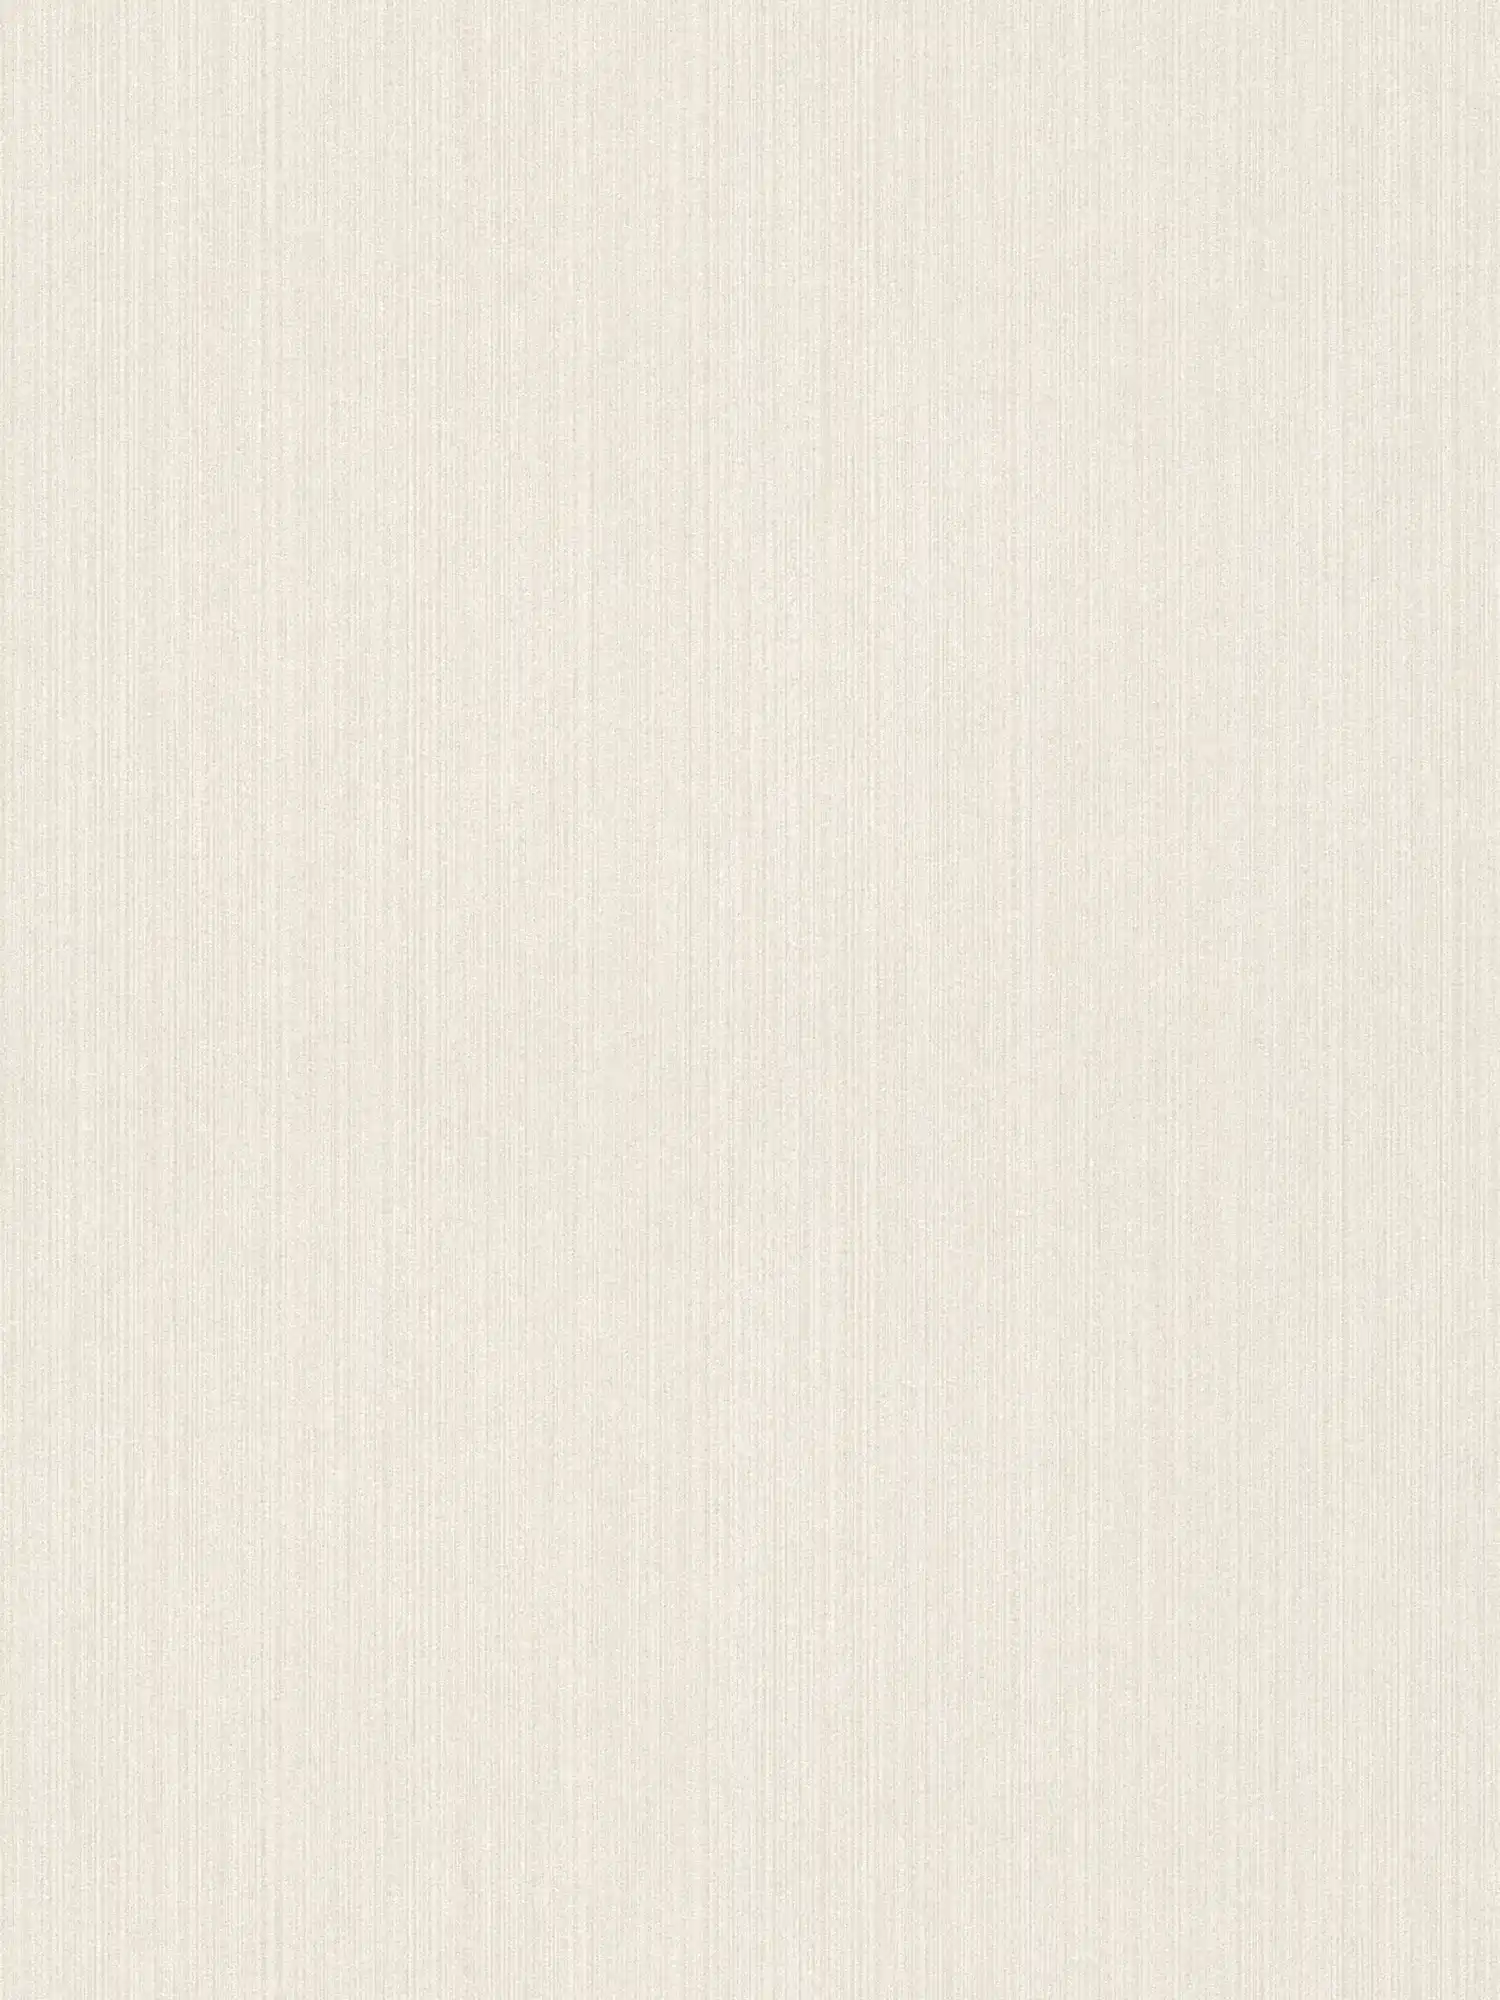         Glitter wallpaper with lined design & wild silk look - white
    